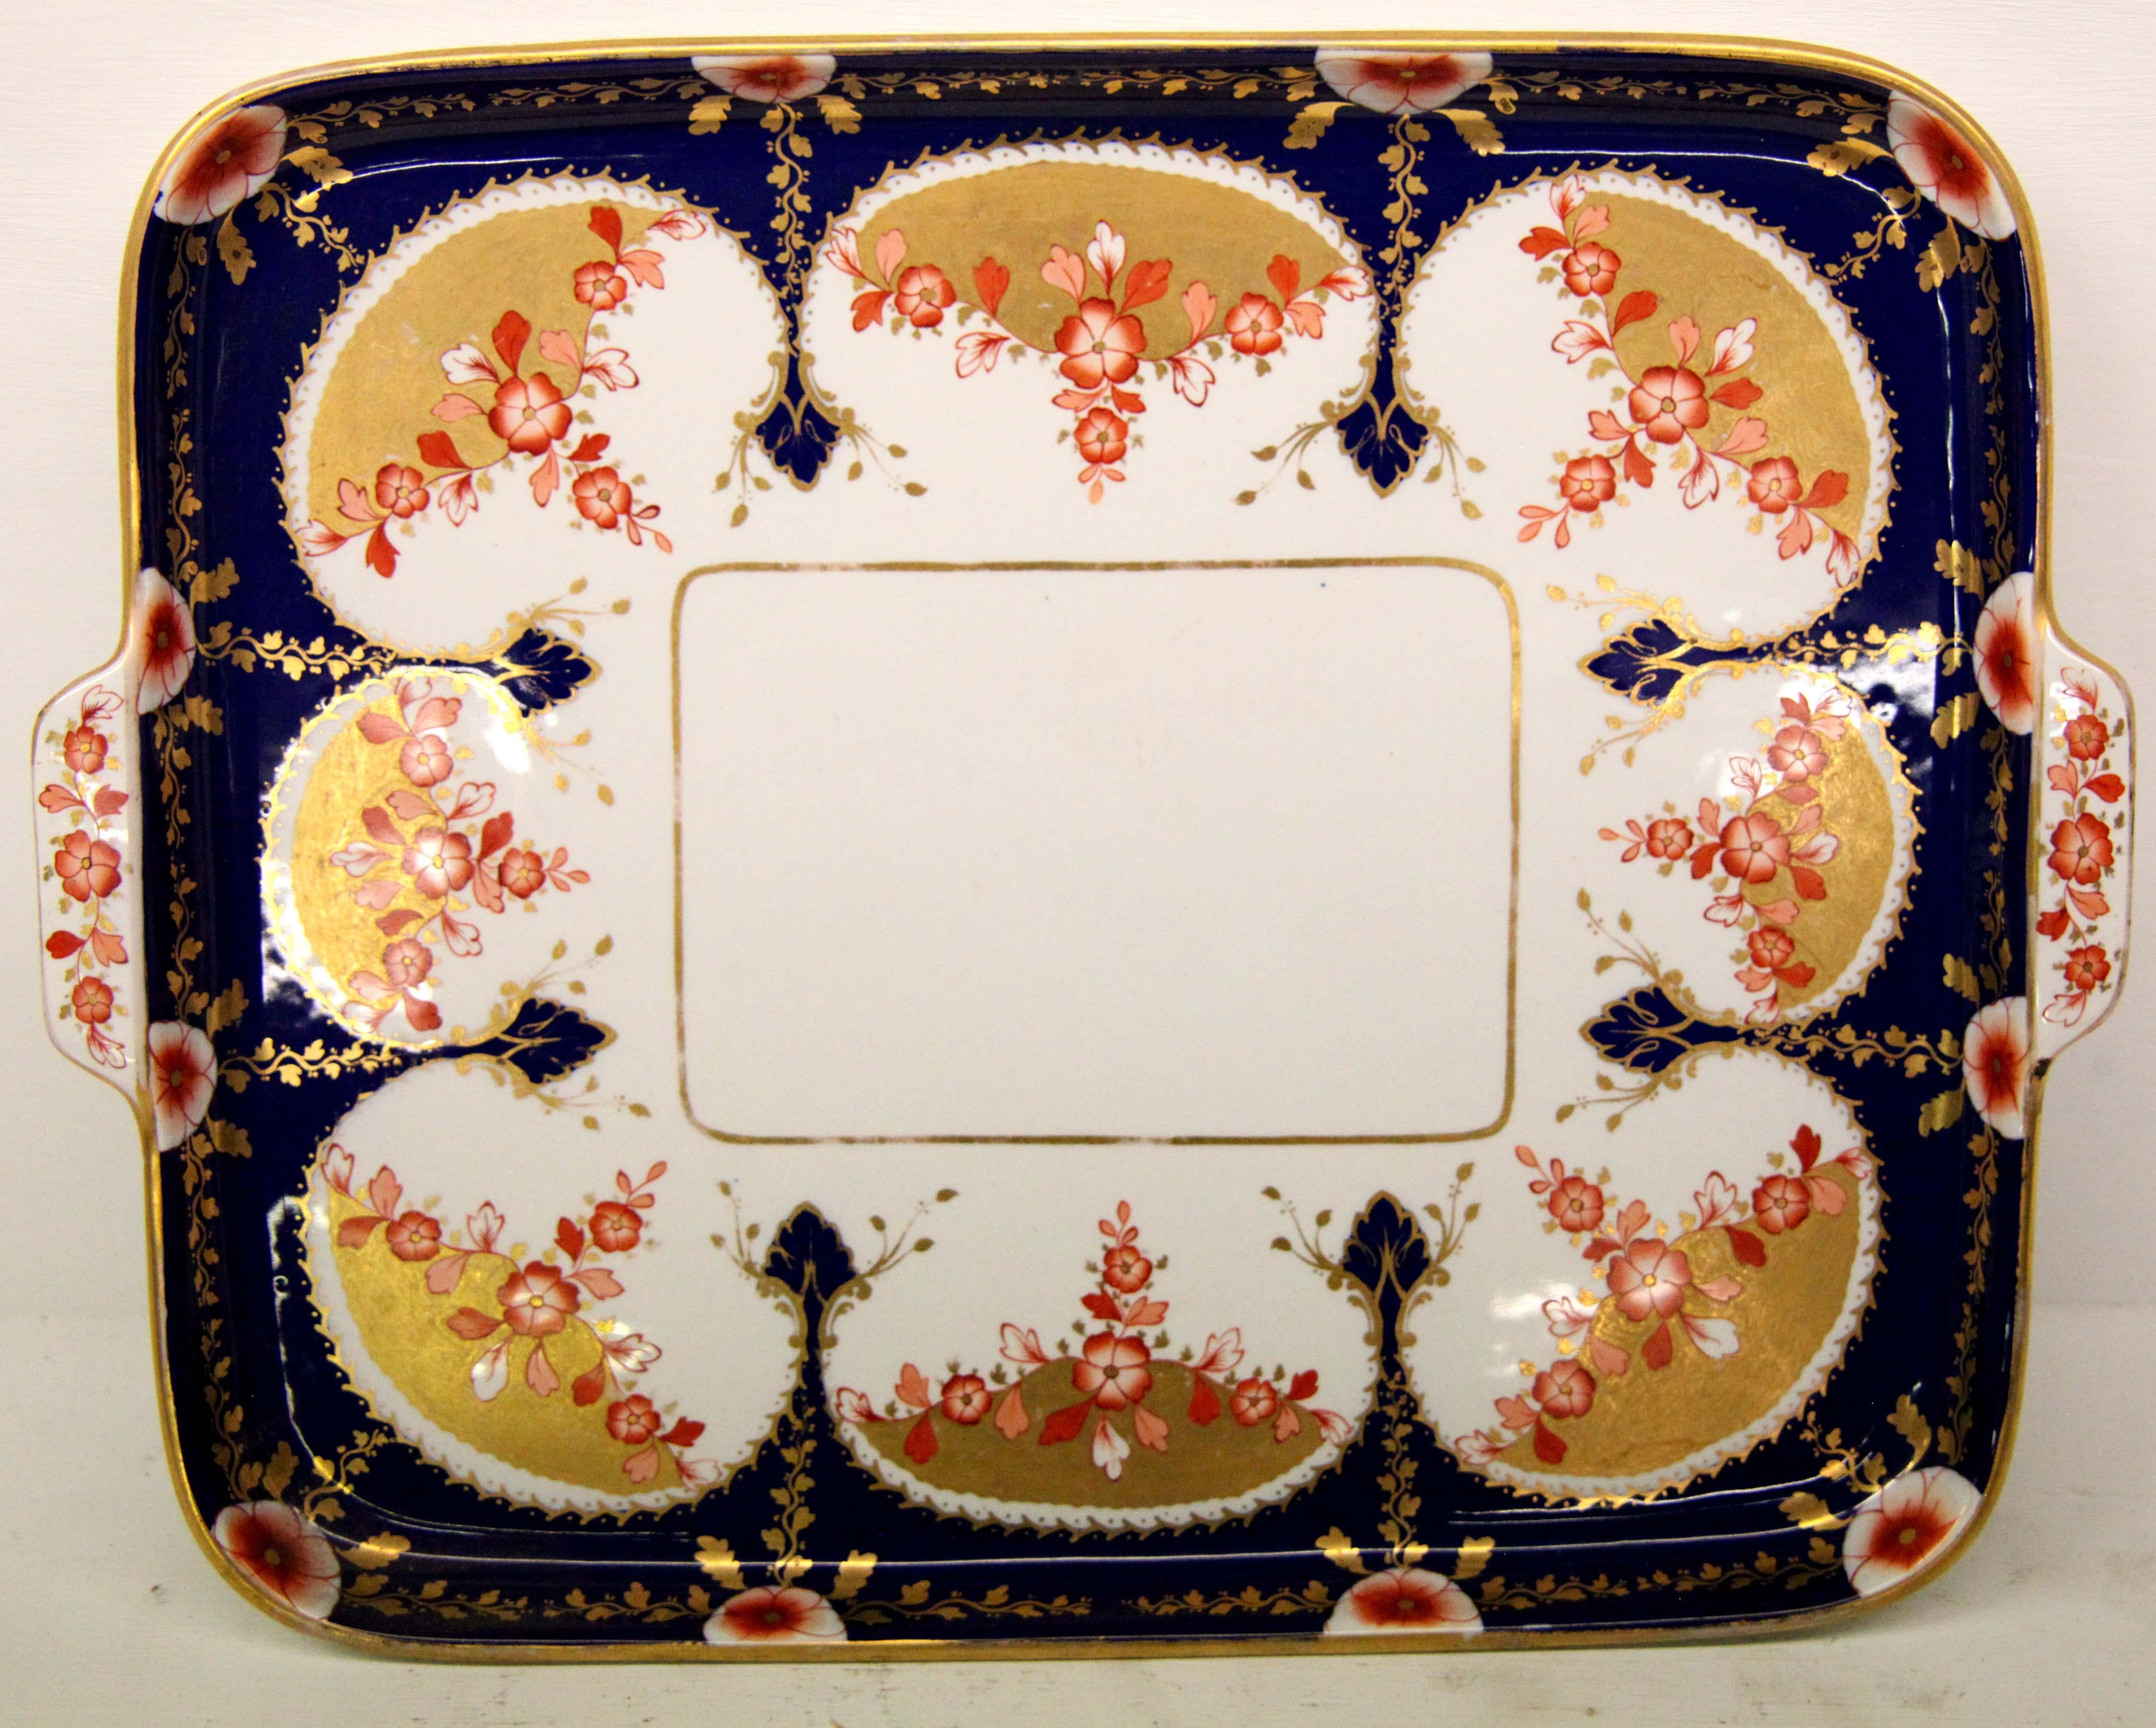 19th Century English Copeland Porcelain Serving Tray For Sale 2